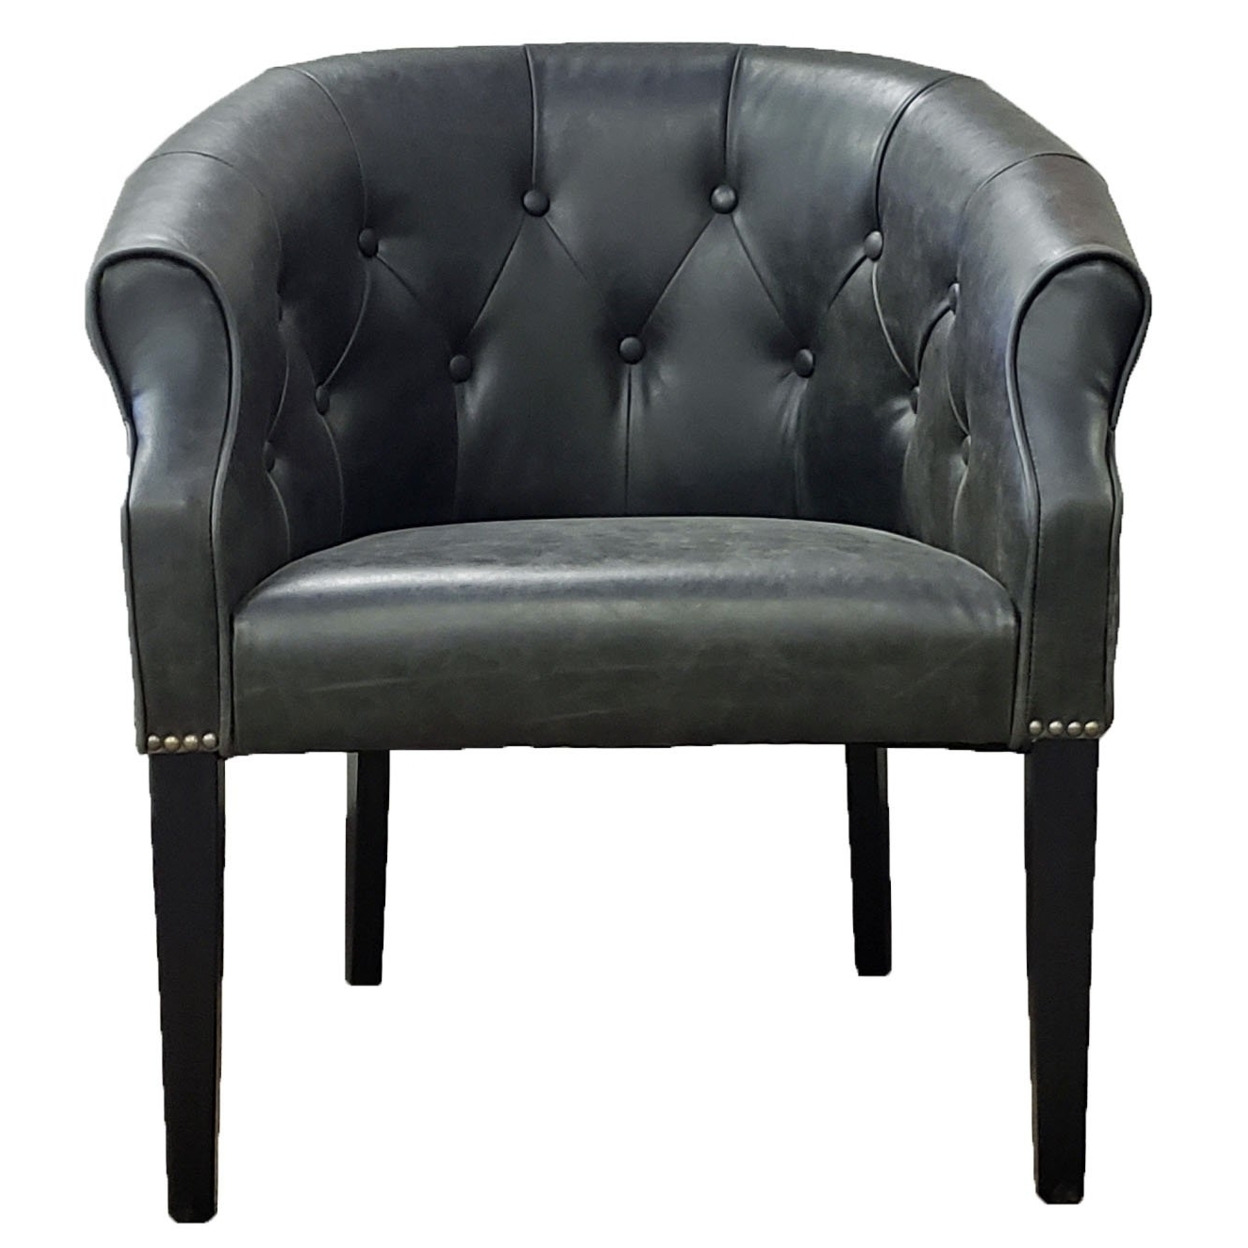 Antique Leather Tub Chair in Distress Black